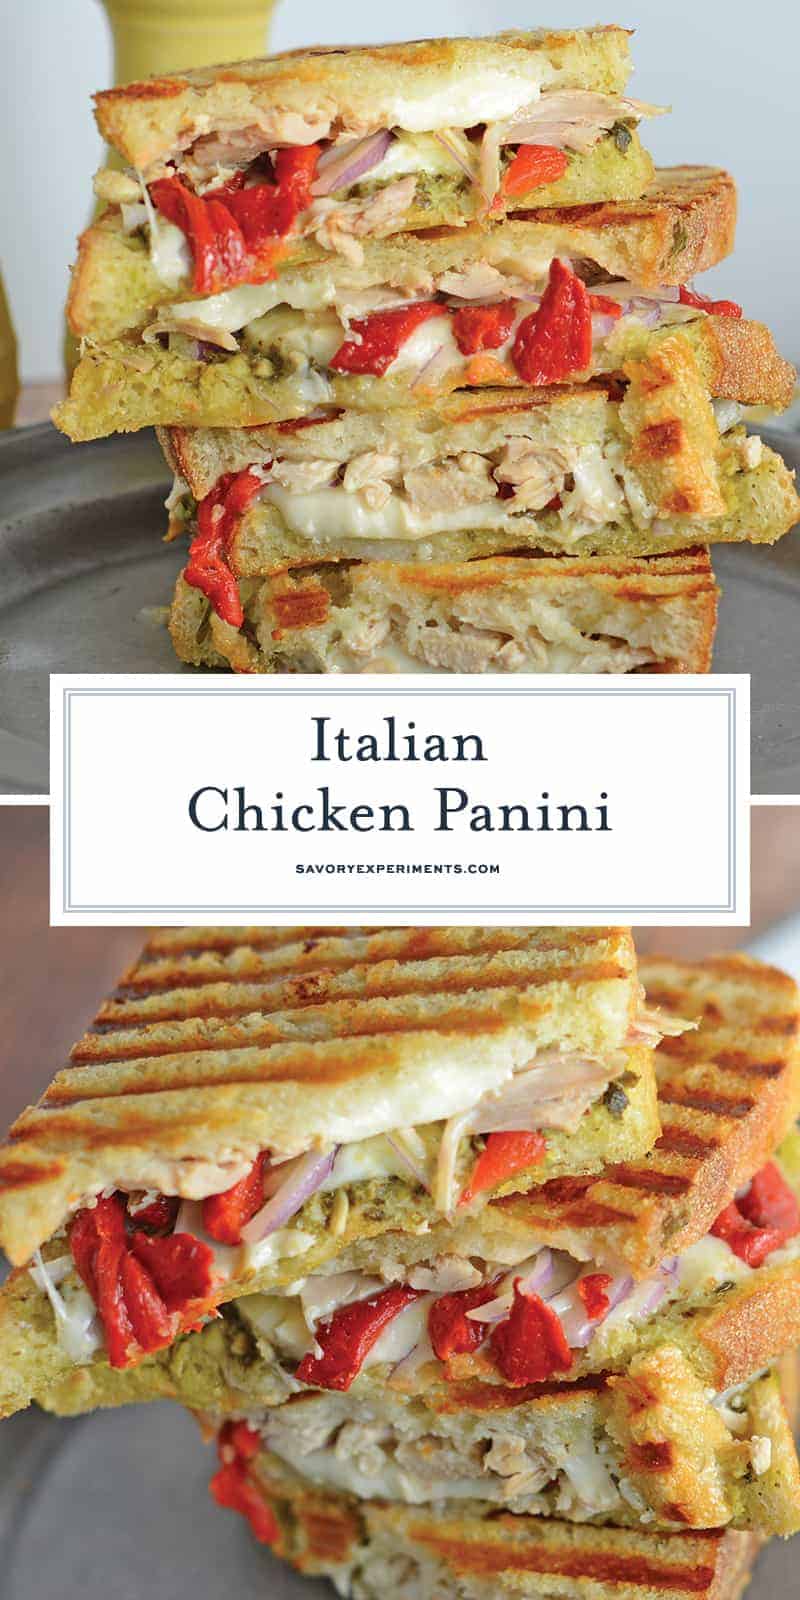 Italian Chicken Panini Recipe is made up of crusty bread filled with gooey mozzarella cheese, roasted red pepper, shredded chicken and lots of garlicky pesto. #chickenpanini #paninirecipe #paninisandwich www.savoryexperiments.com